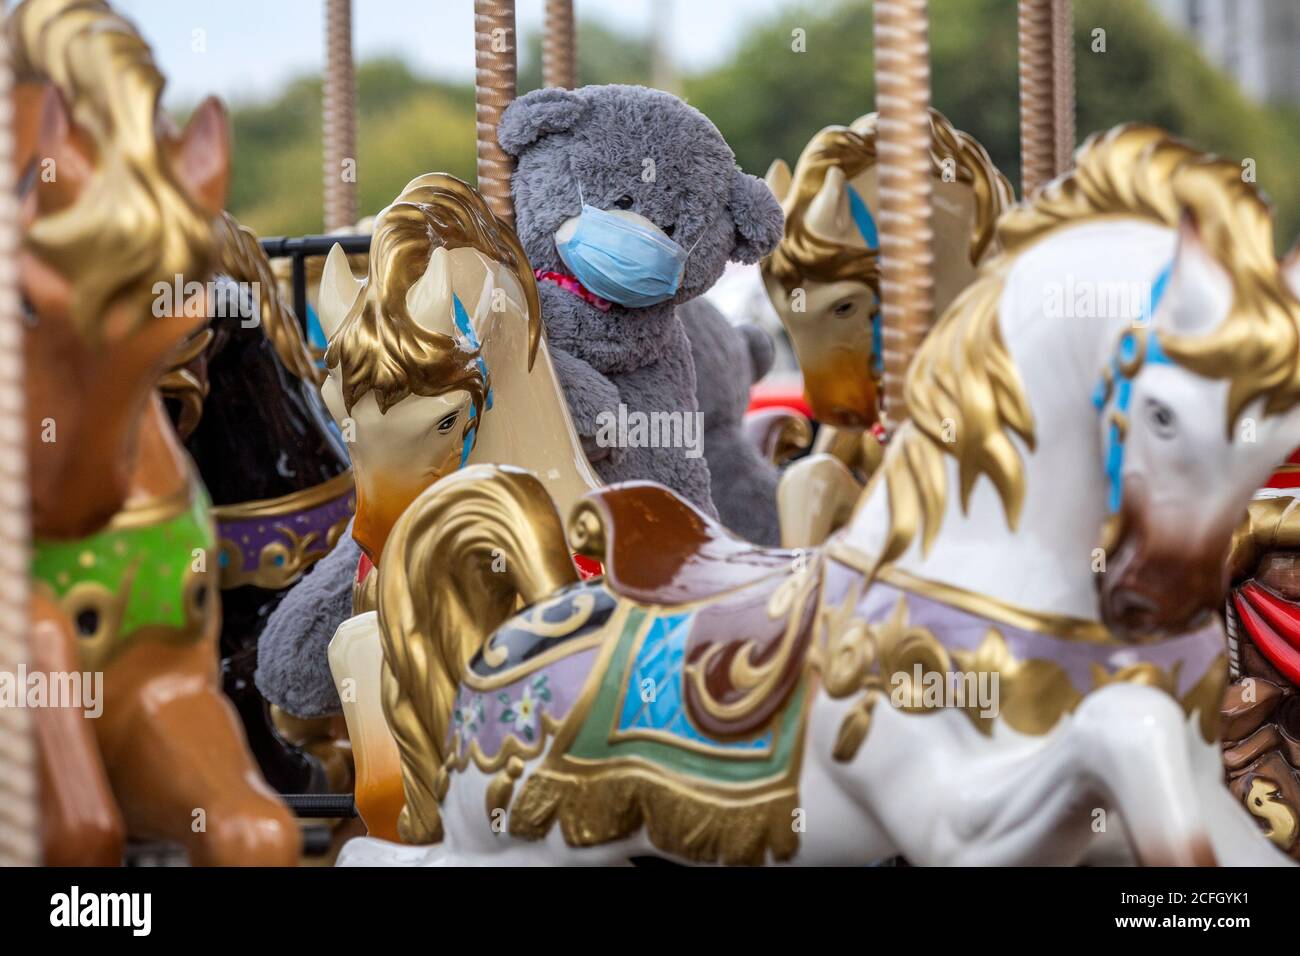 A teddy bear toy wearing a protective mask seats on a carousel horse in a city during the restrictions with the novel coronavirus COIVD-19 pandemic Stock Photo